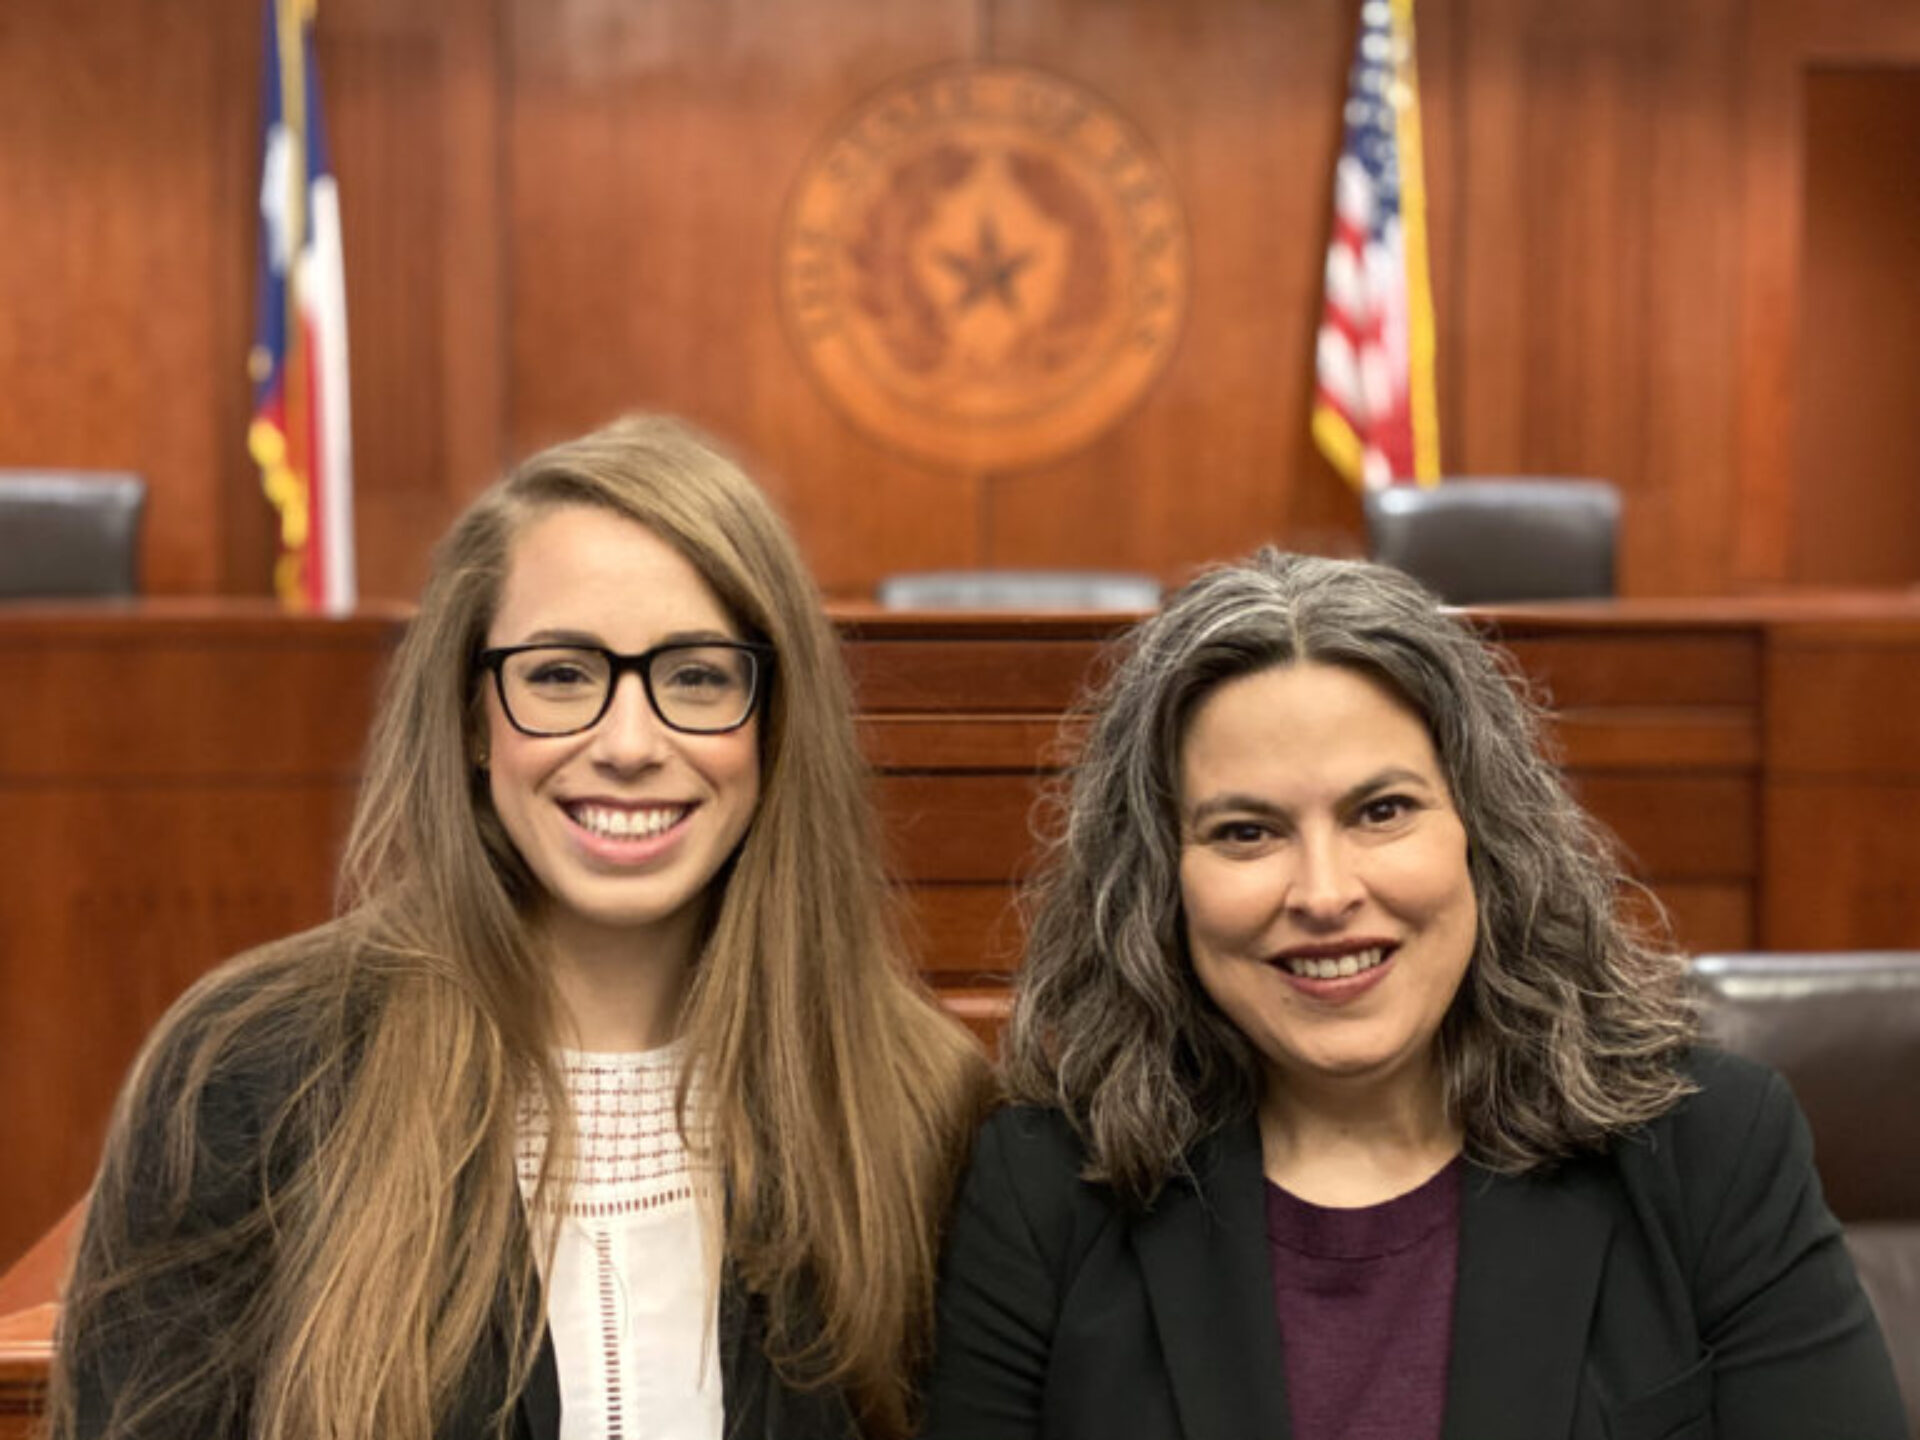 Student and professor sit in a courtroom